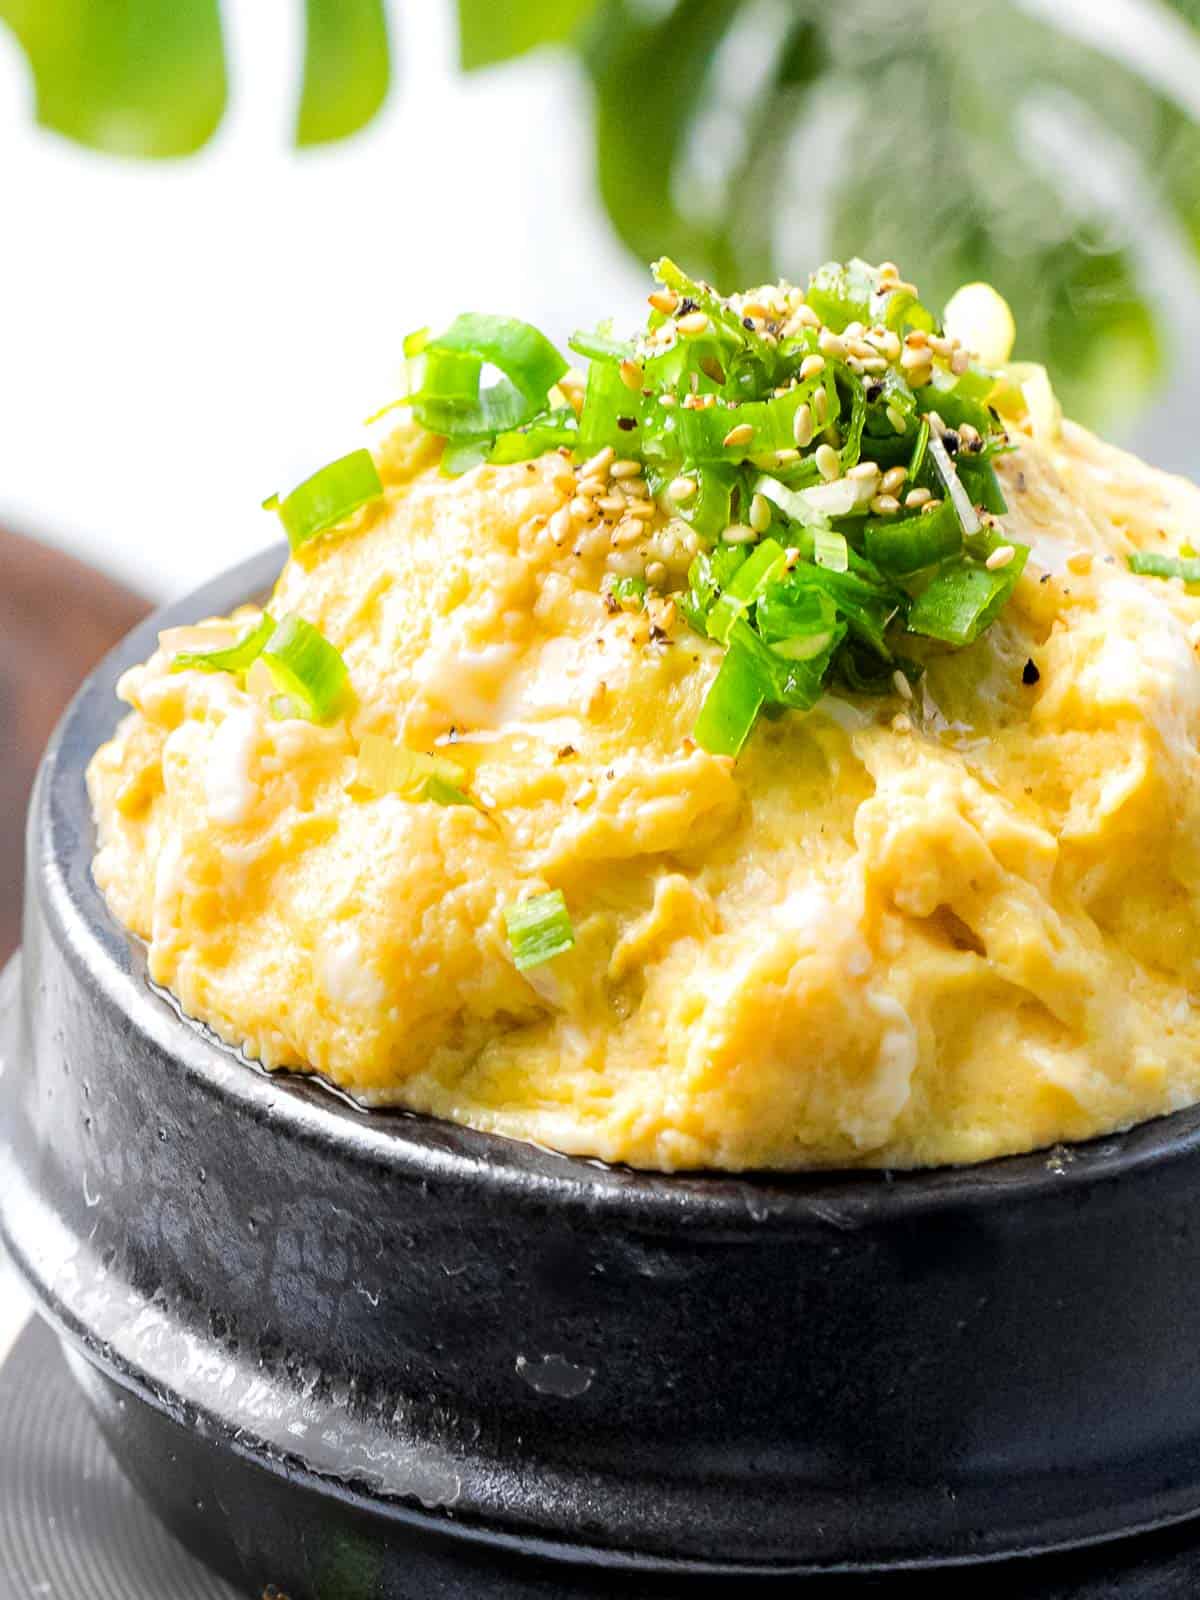 Korean steamed eggs (gyeran jjim) cooked until soft and fluffy and garnished with green onions.